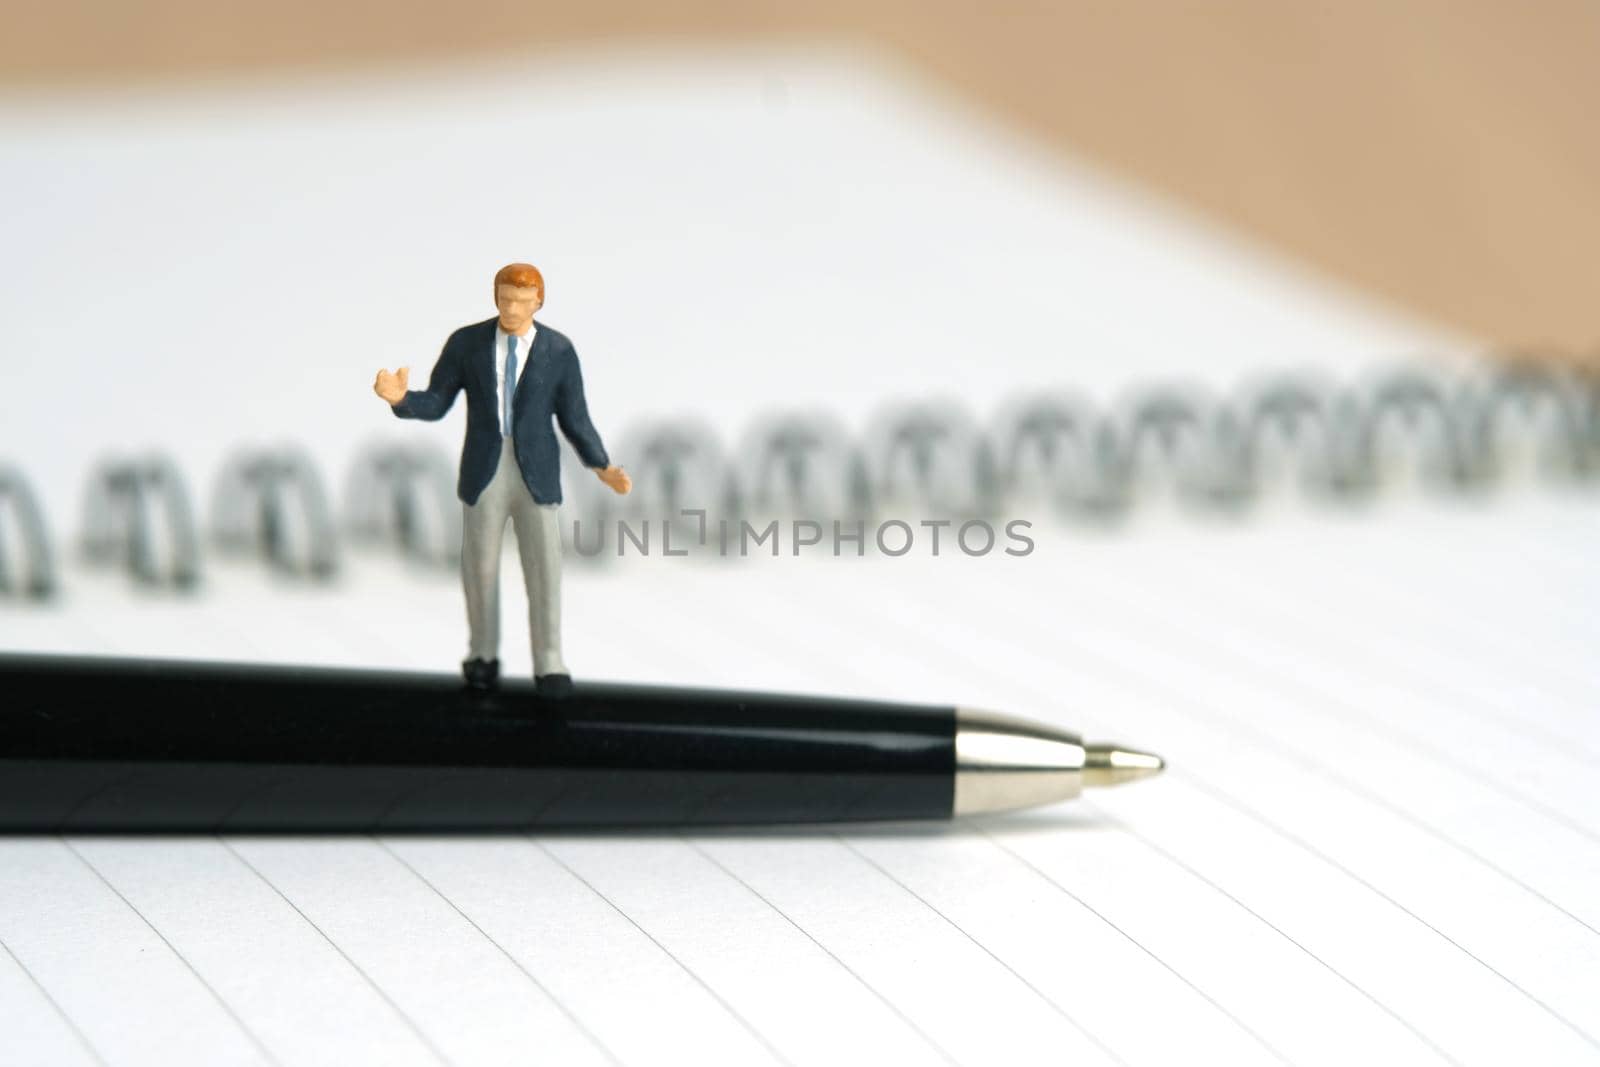 Miniature people toy figure photography. Signing agreement concept. A shrugging businessman stand above a black pen and opened document on wooden desk. Image photo